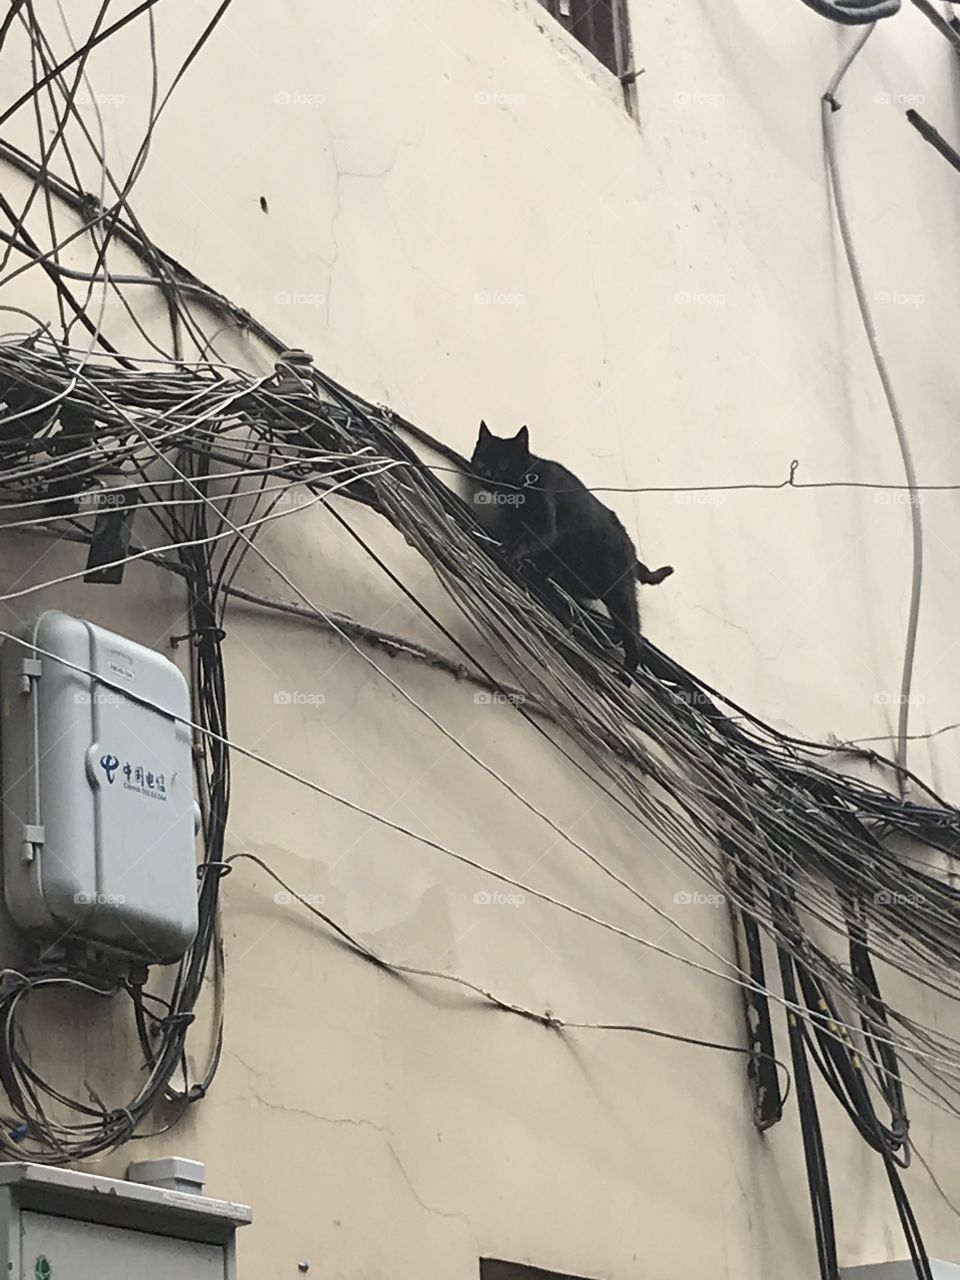 Exploring the wire net - literally - this kitty is very brave and skillfully navigating the mess of wires